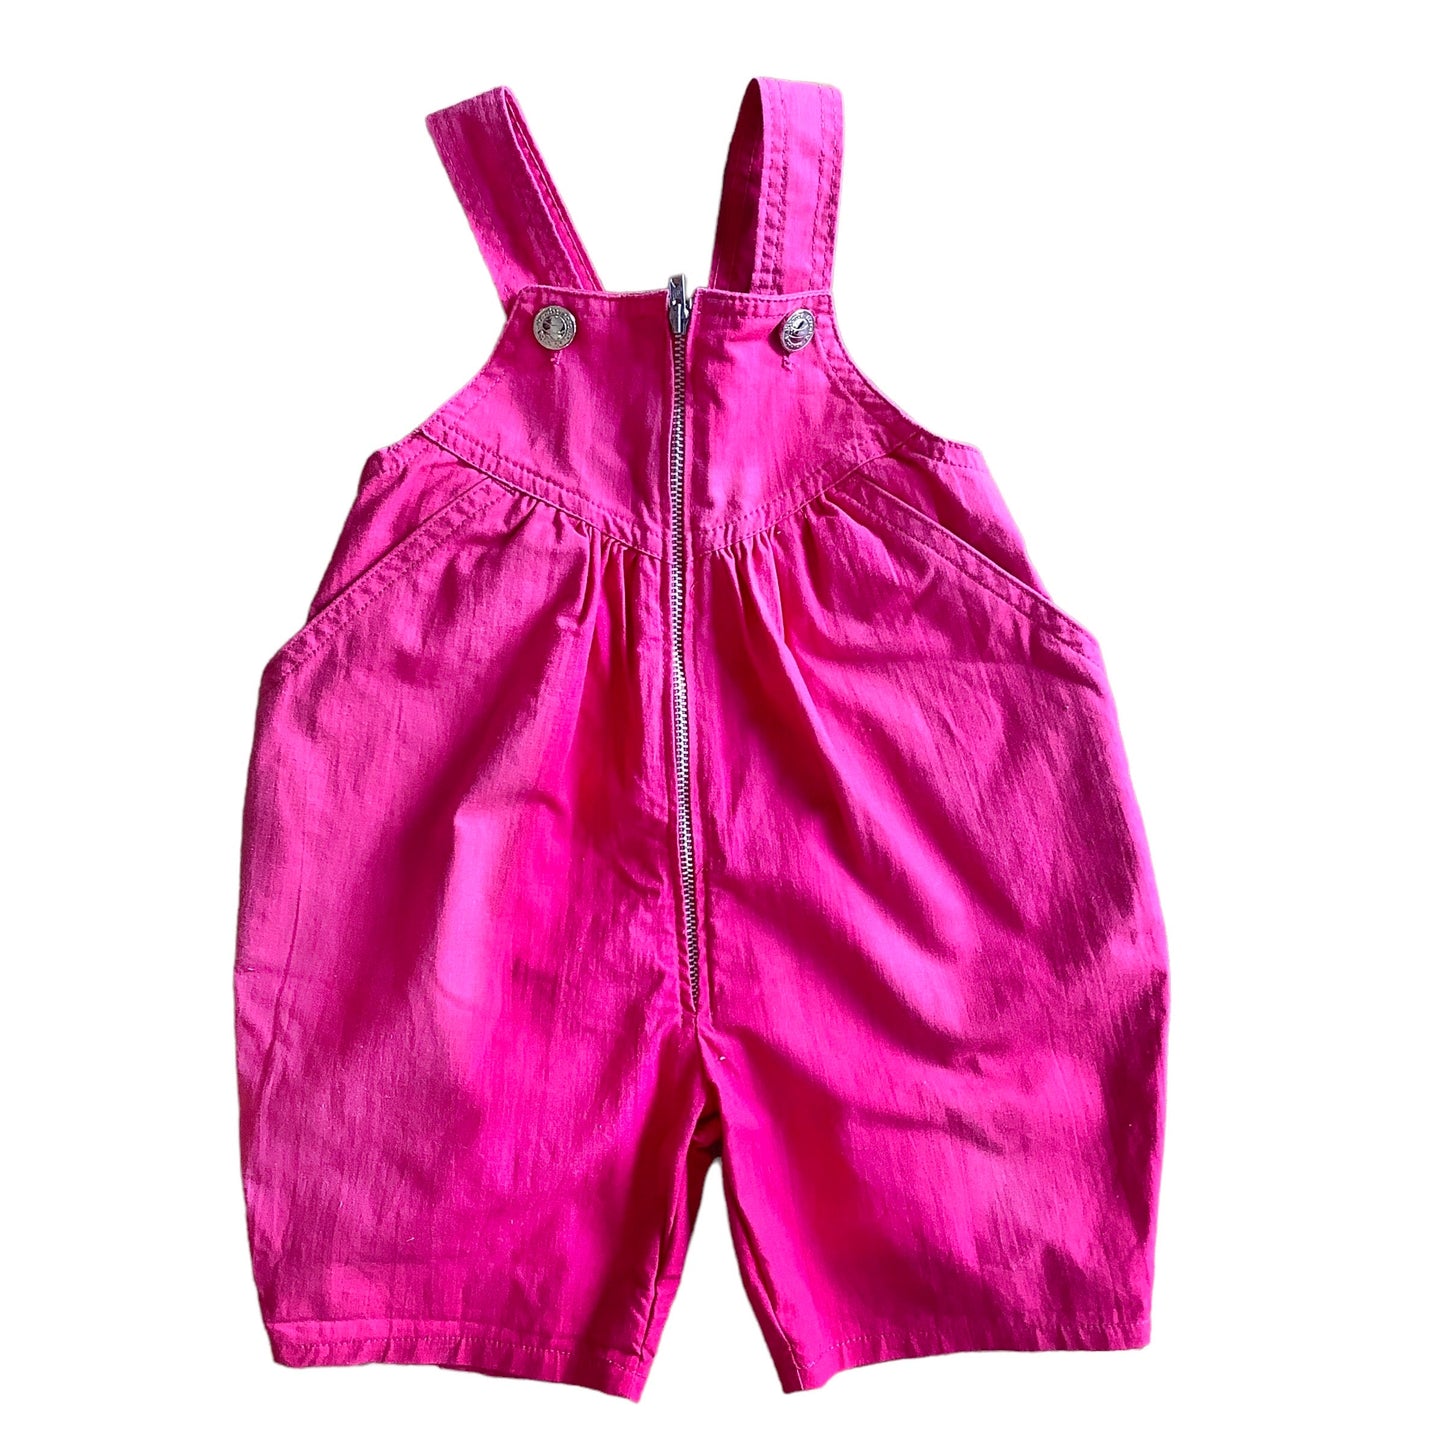 Vintage 1980s Neon Pink Dungarees  9-12 Months